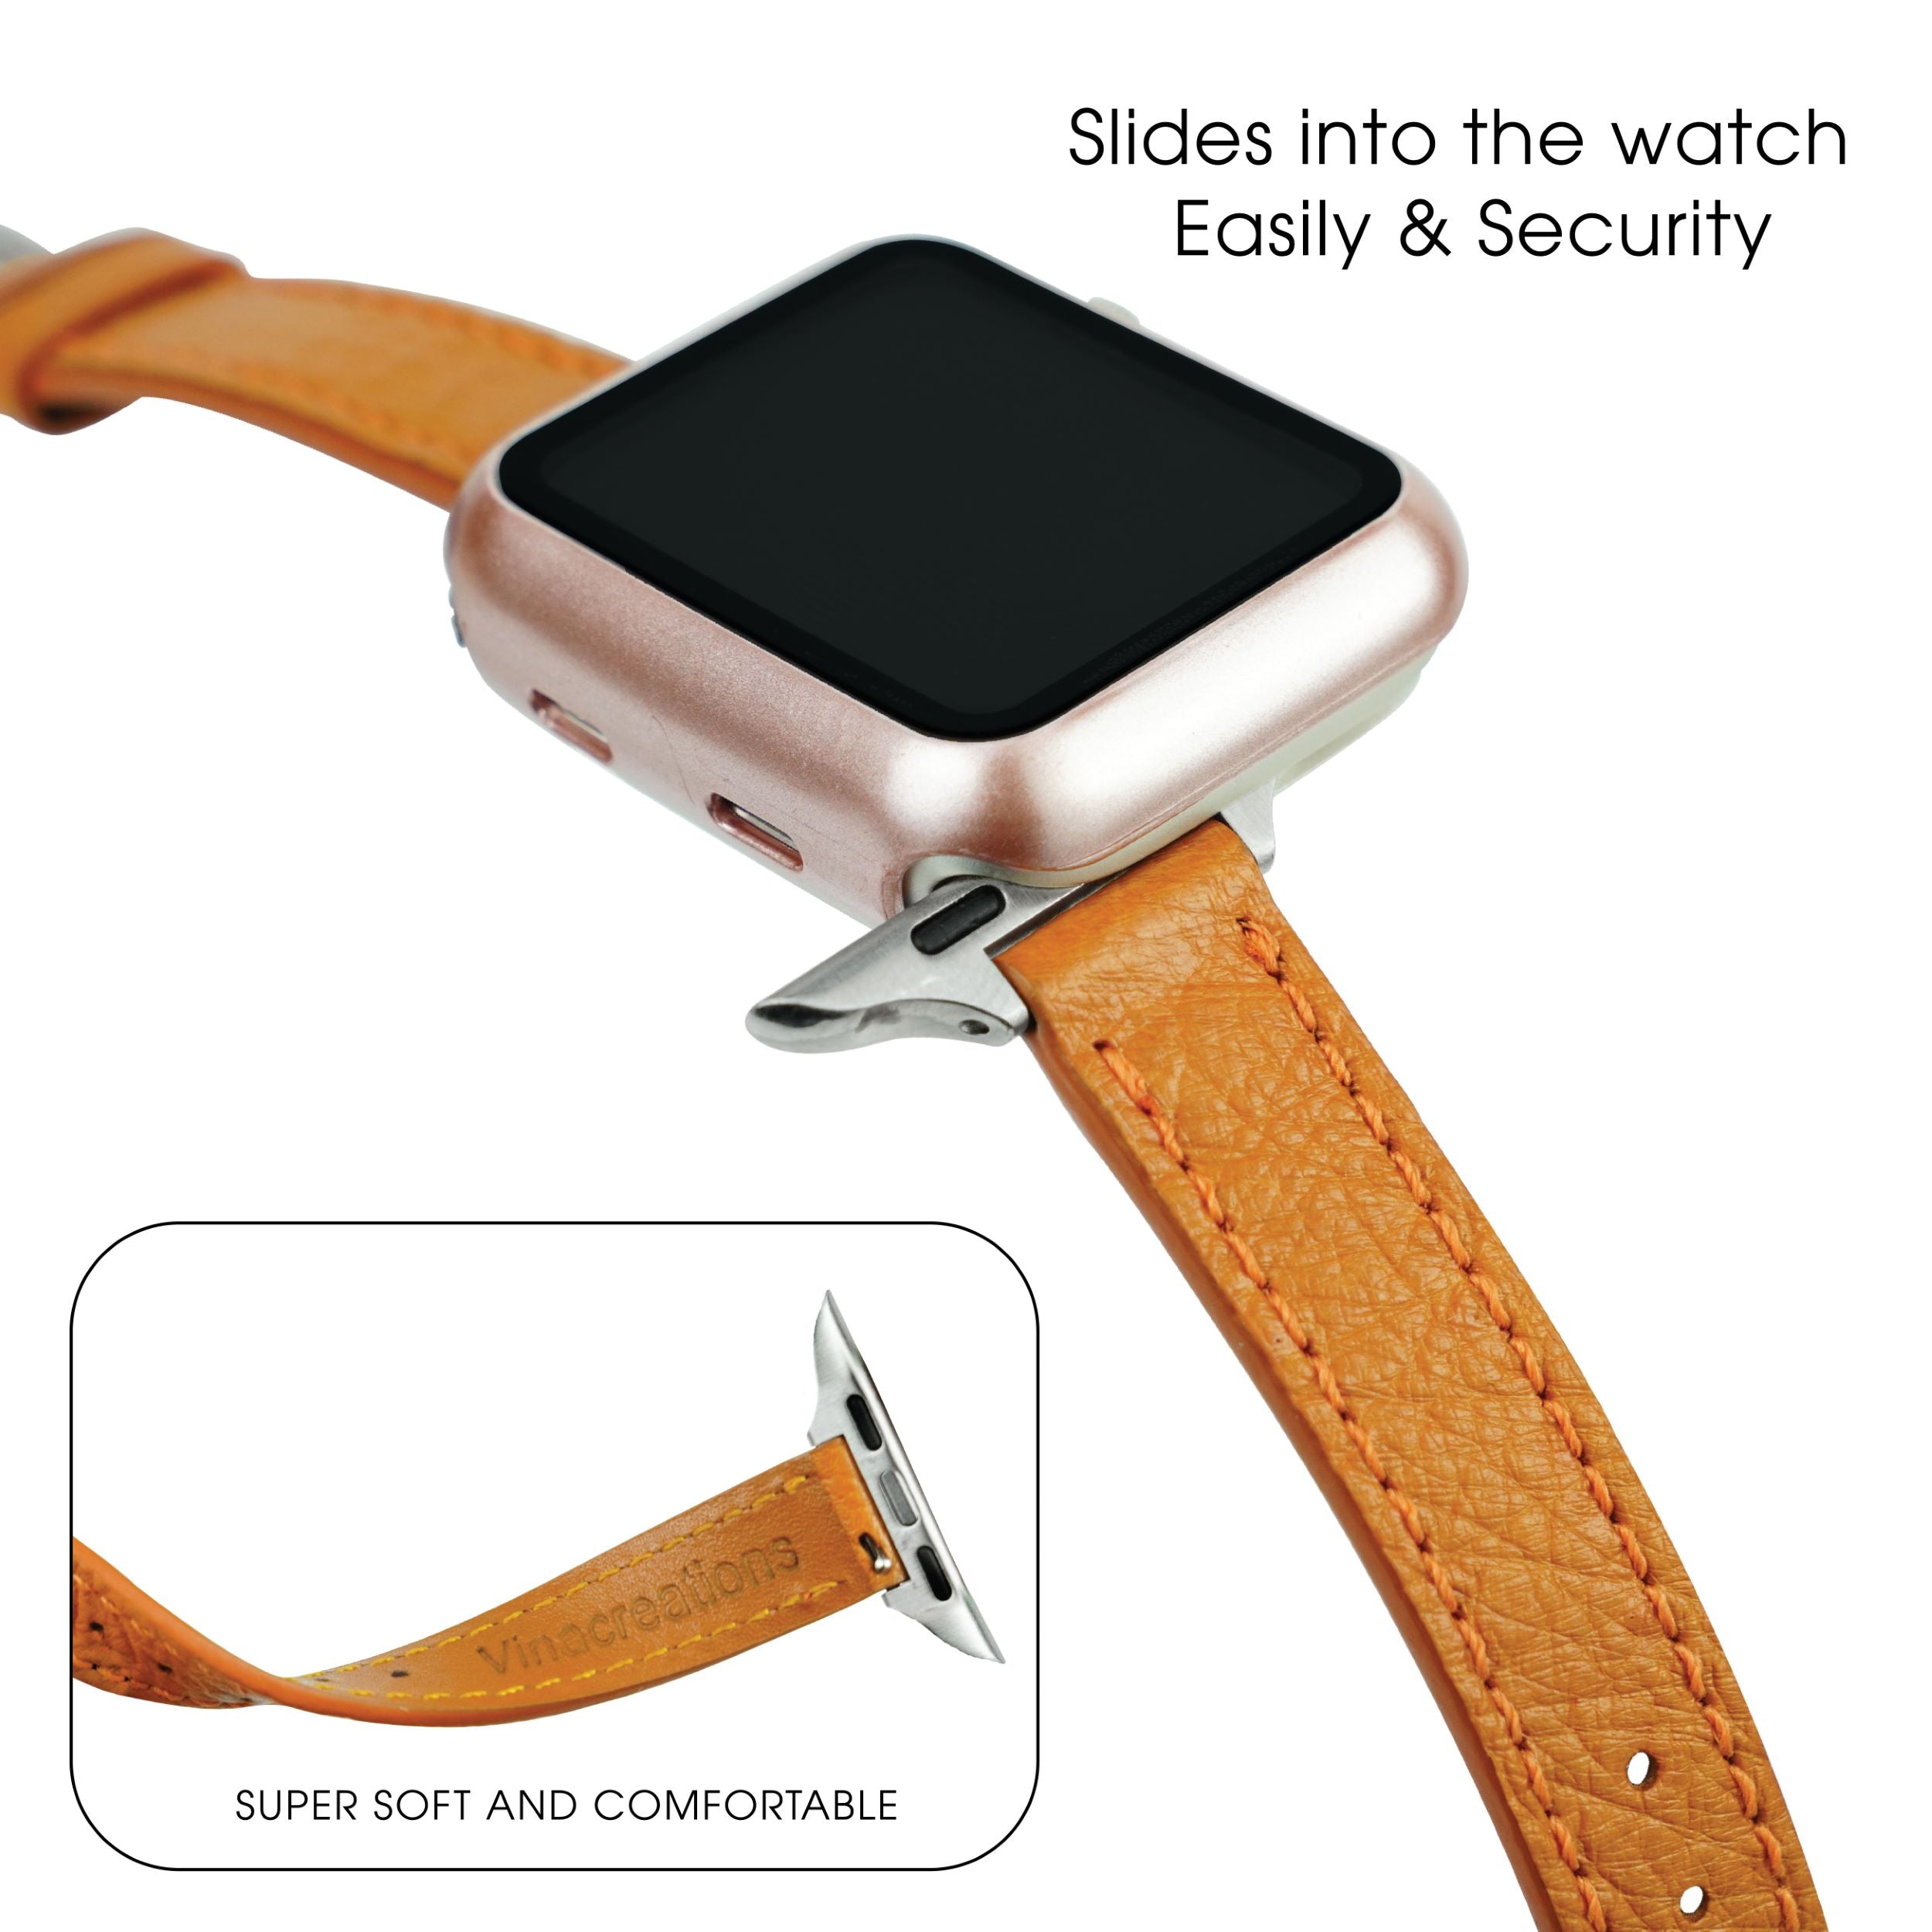 Tan Flat Ostrich Leather Band Compatible Apple Watch Iwatch 42mm Screen Protector Case Silver Adapter Replacement Strap For Smartwatch Series 1 2 3 Leather Handmade AW-182S-W-42MM